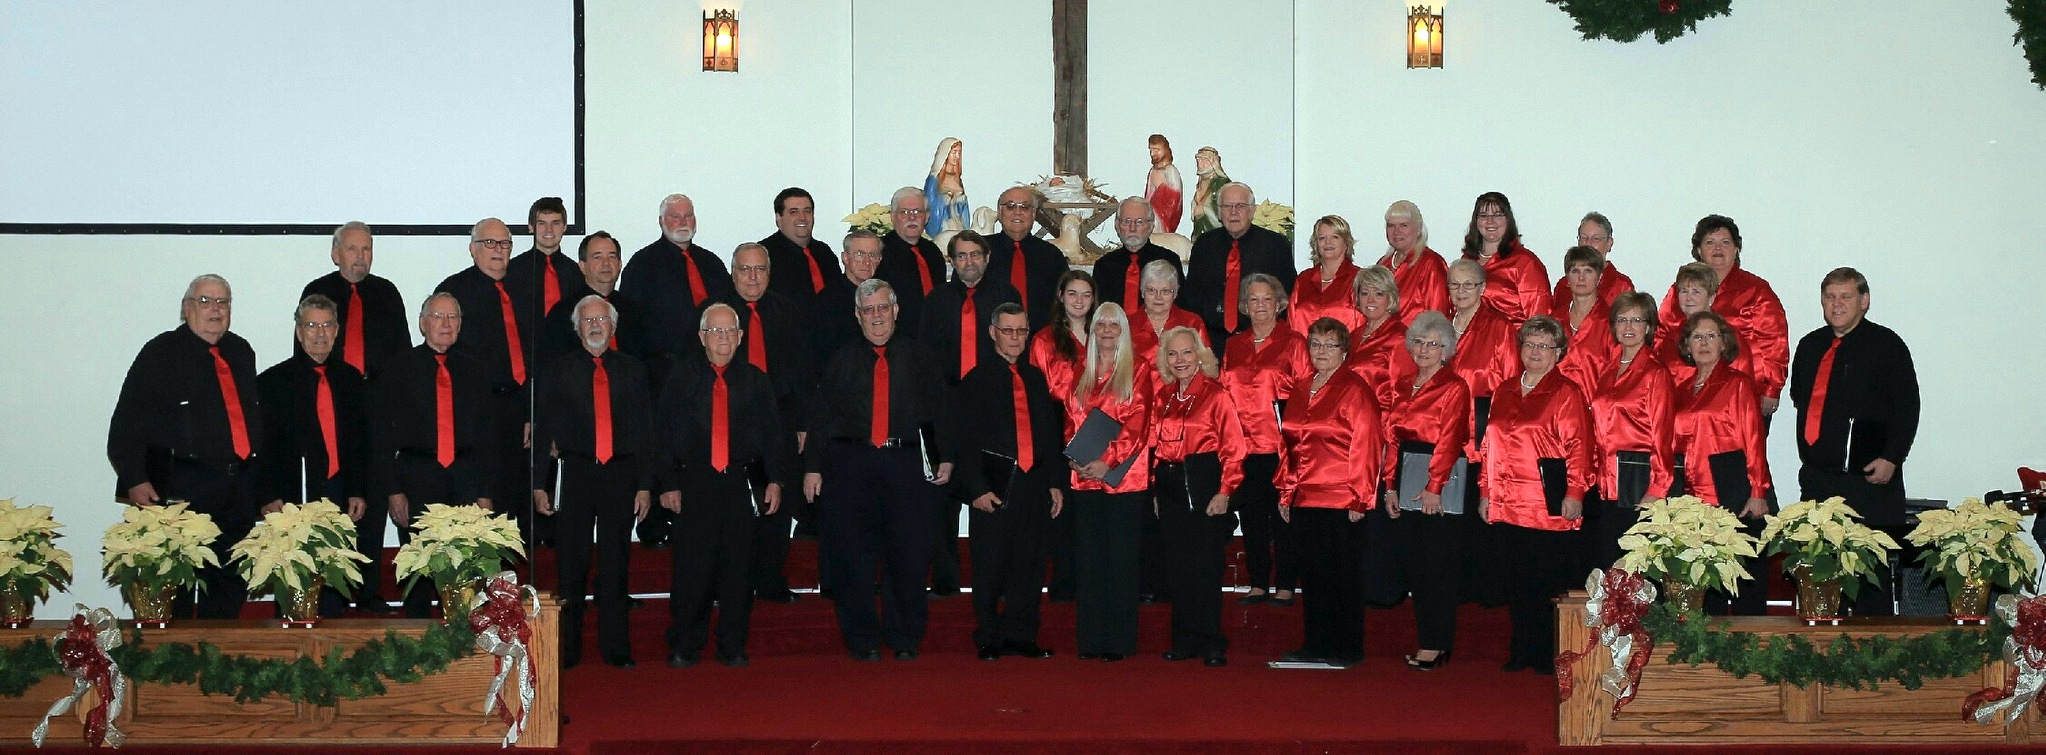 A picture of the D.M. Davis Voice Choirs. They are lined up on rafters in robes that are either red or black.